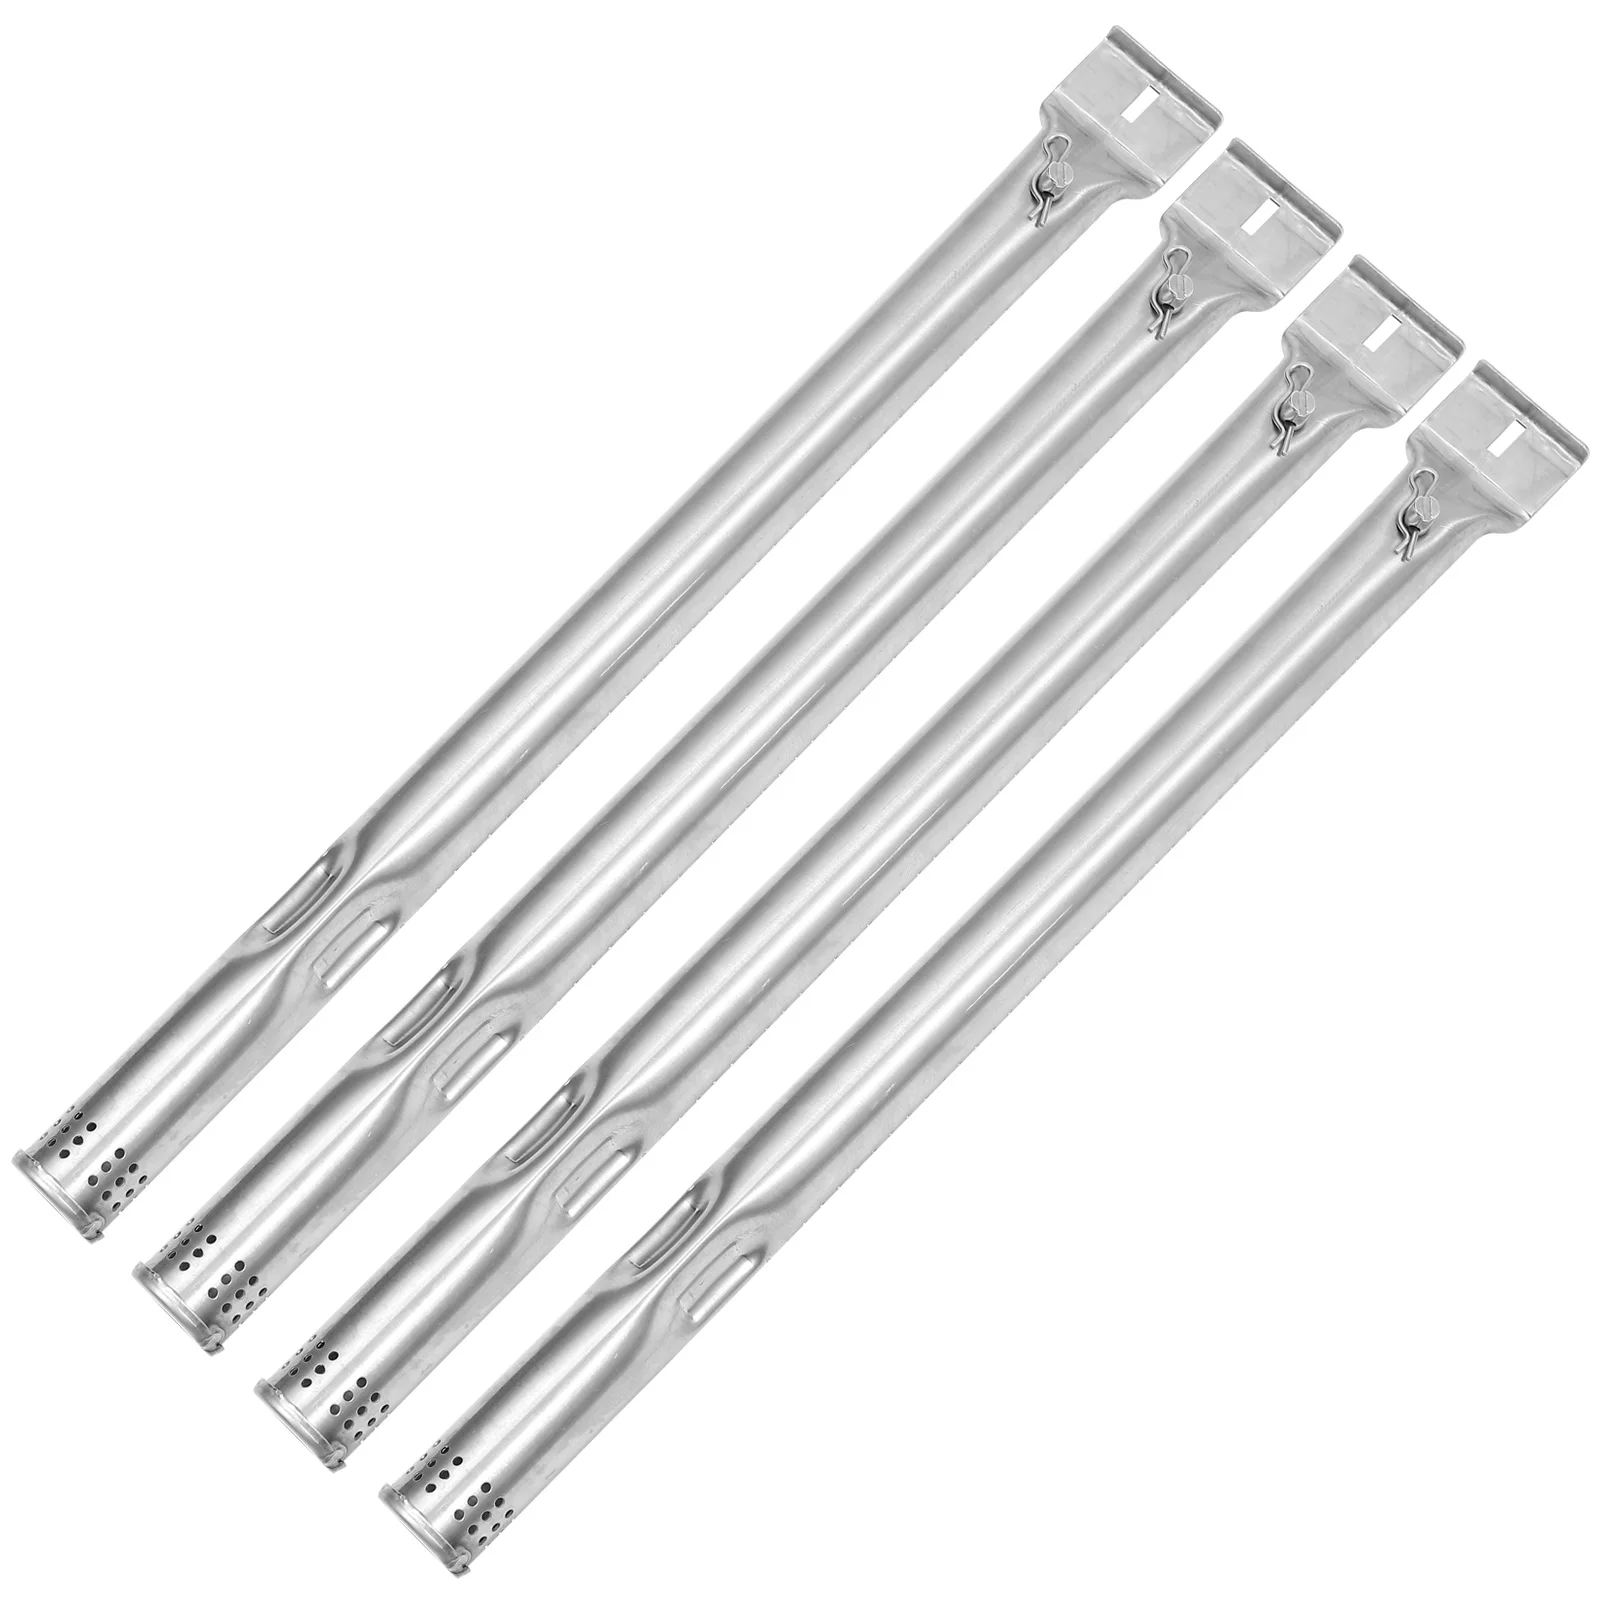 

Tube Grill Burner Tubes Gas Bbq Stainless Steel Outdoor Oven Home Tool Pro Members Mark Parts Accessory Part Replacement Model